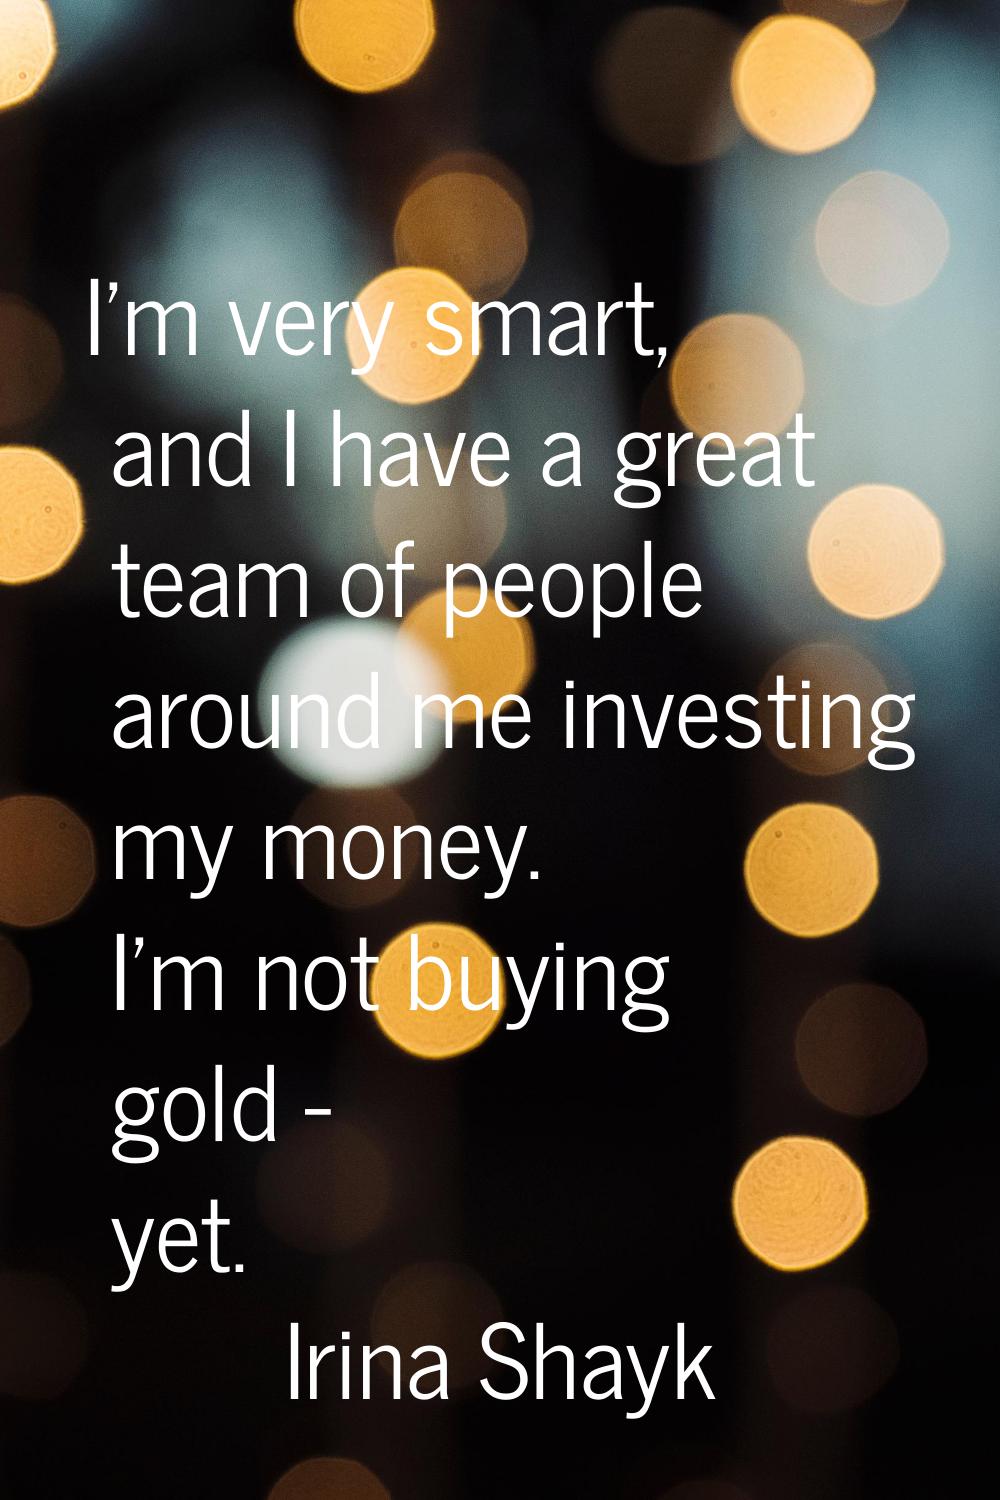 I'm very smart, and I have a great team of people around me investing my money. I'm not buying gold